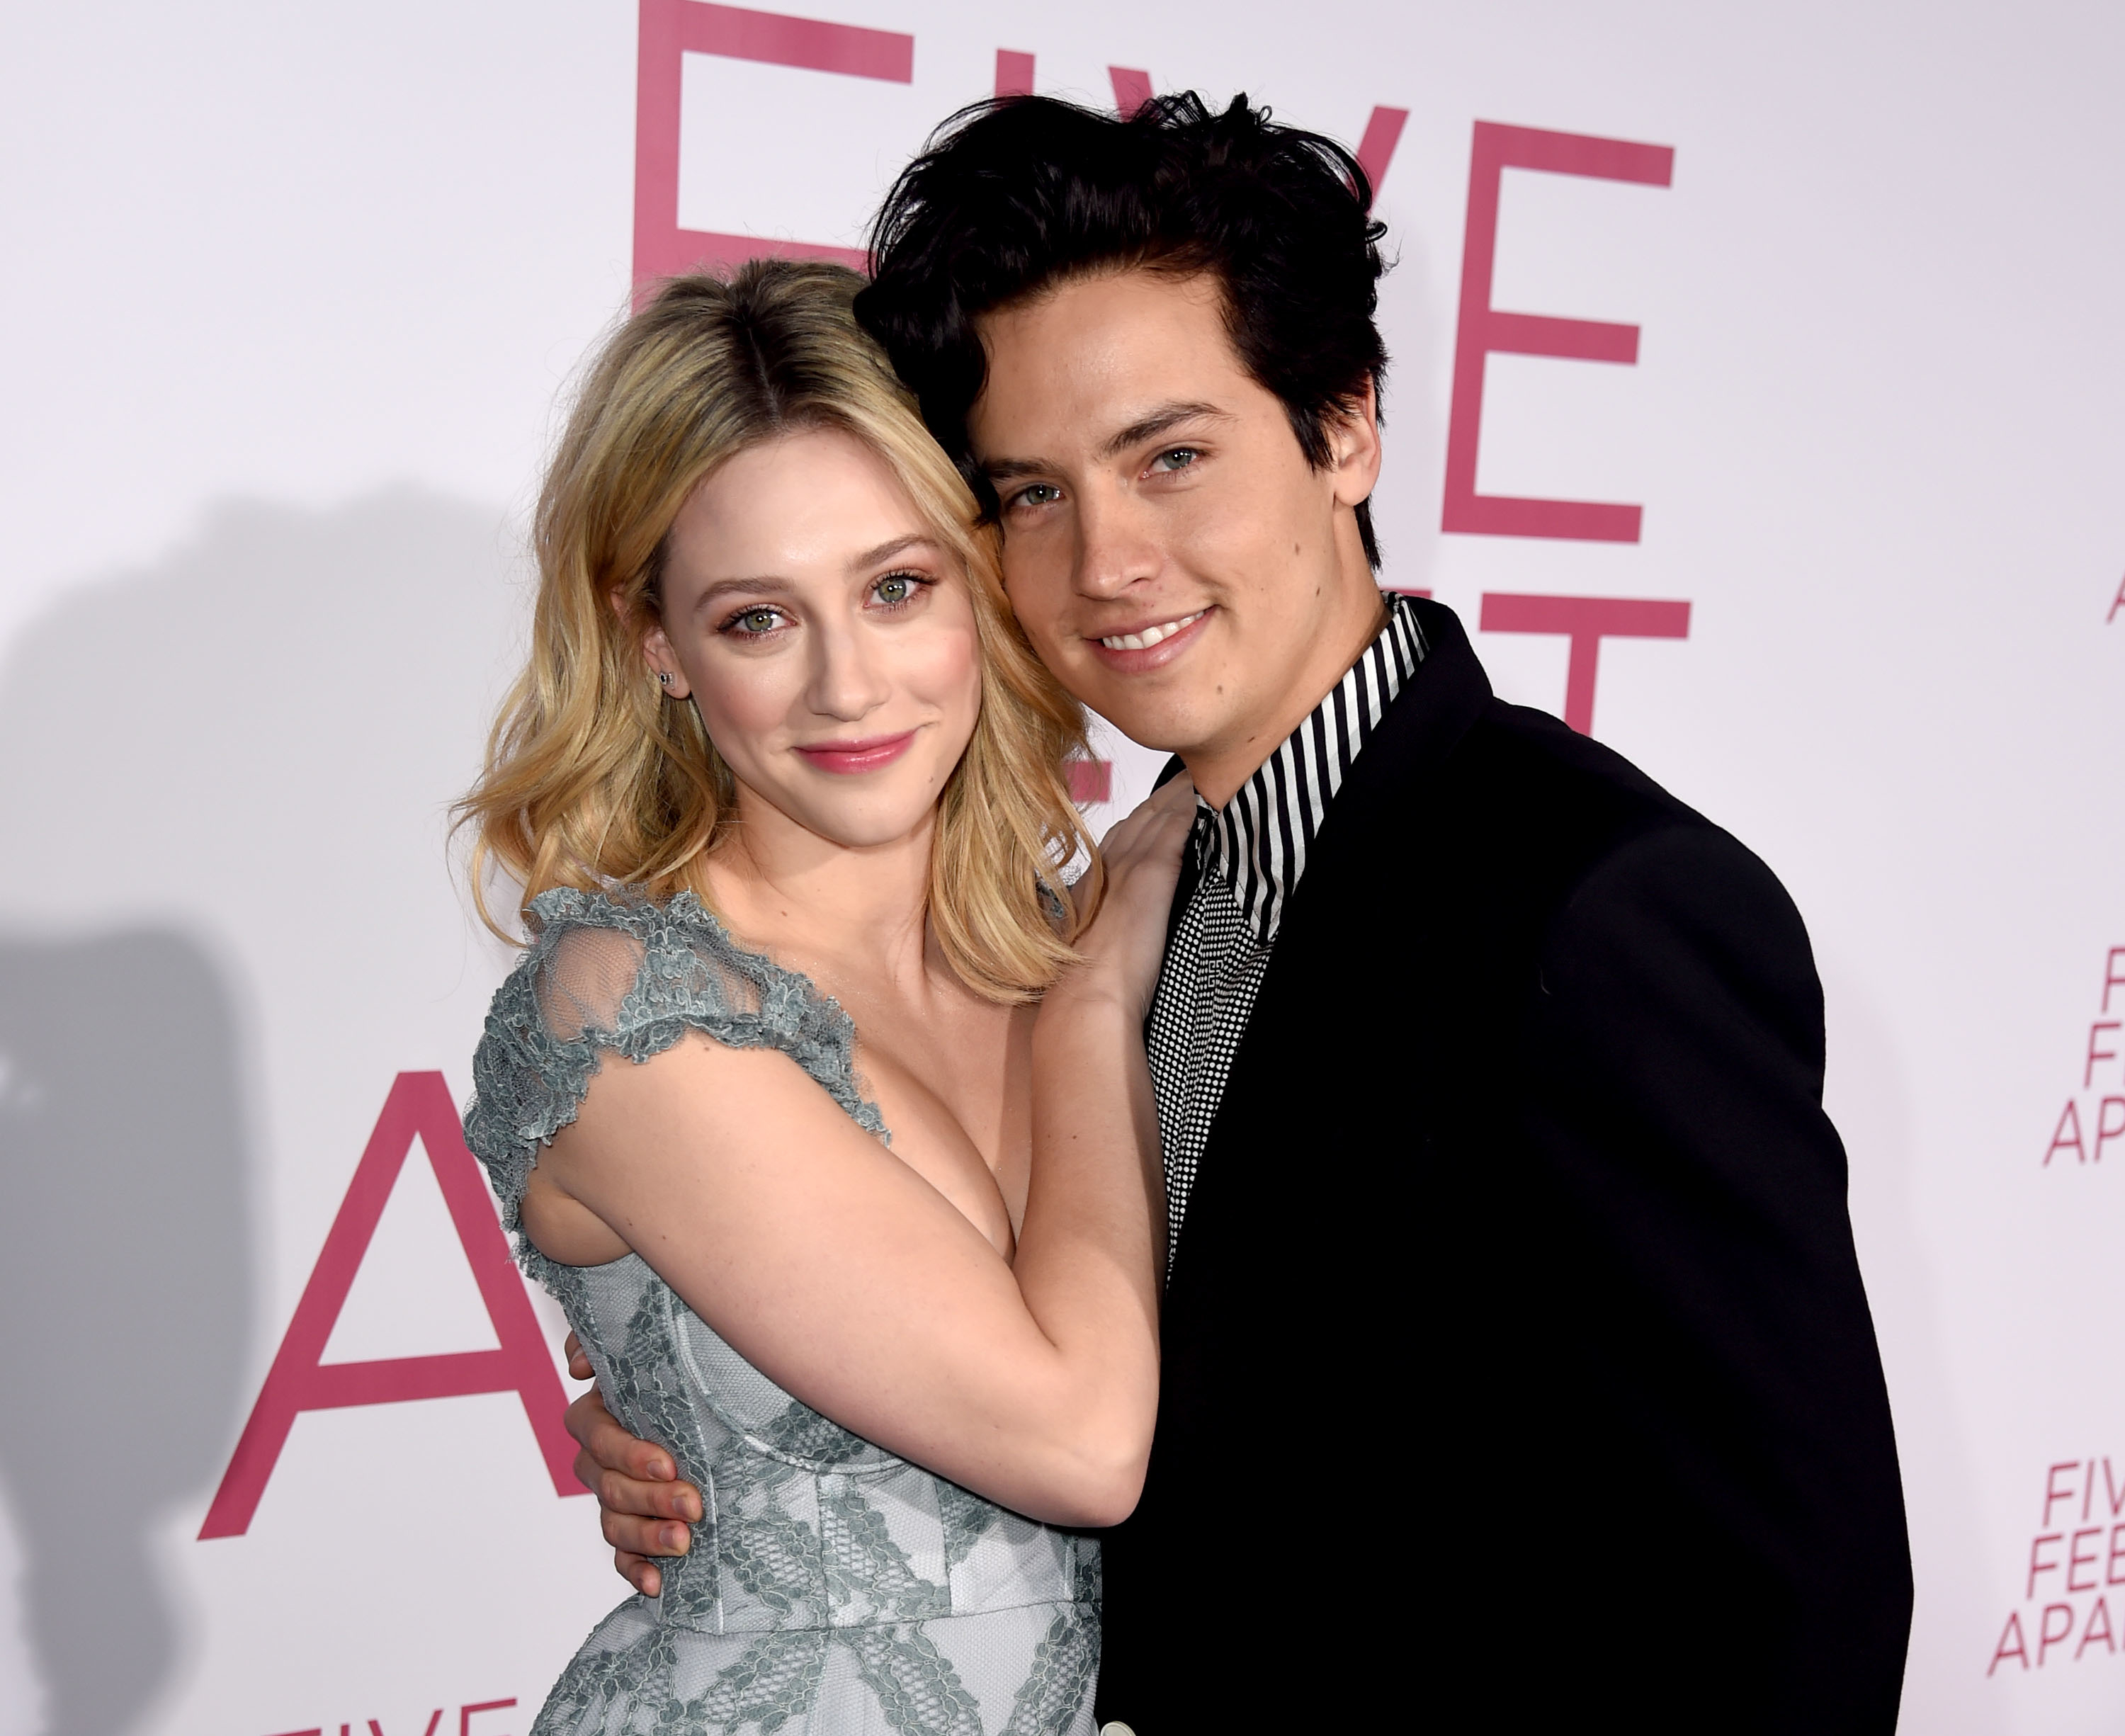 Lili and Cole embracing at a media event